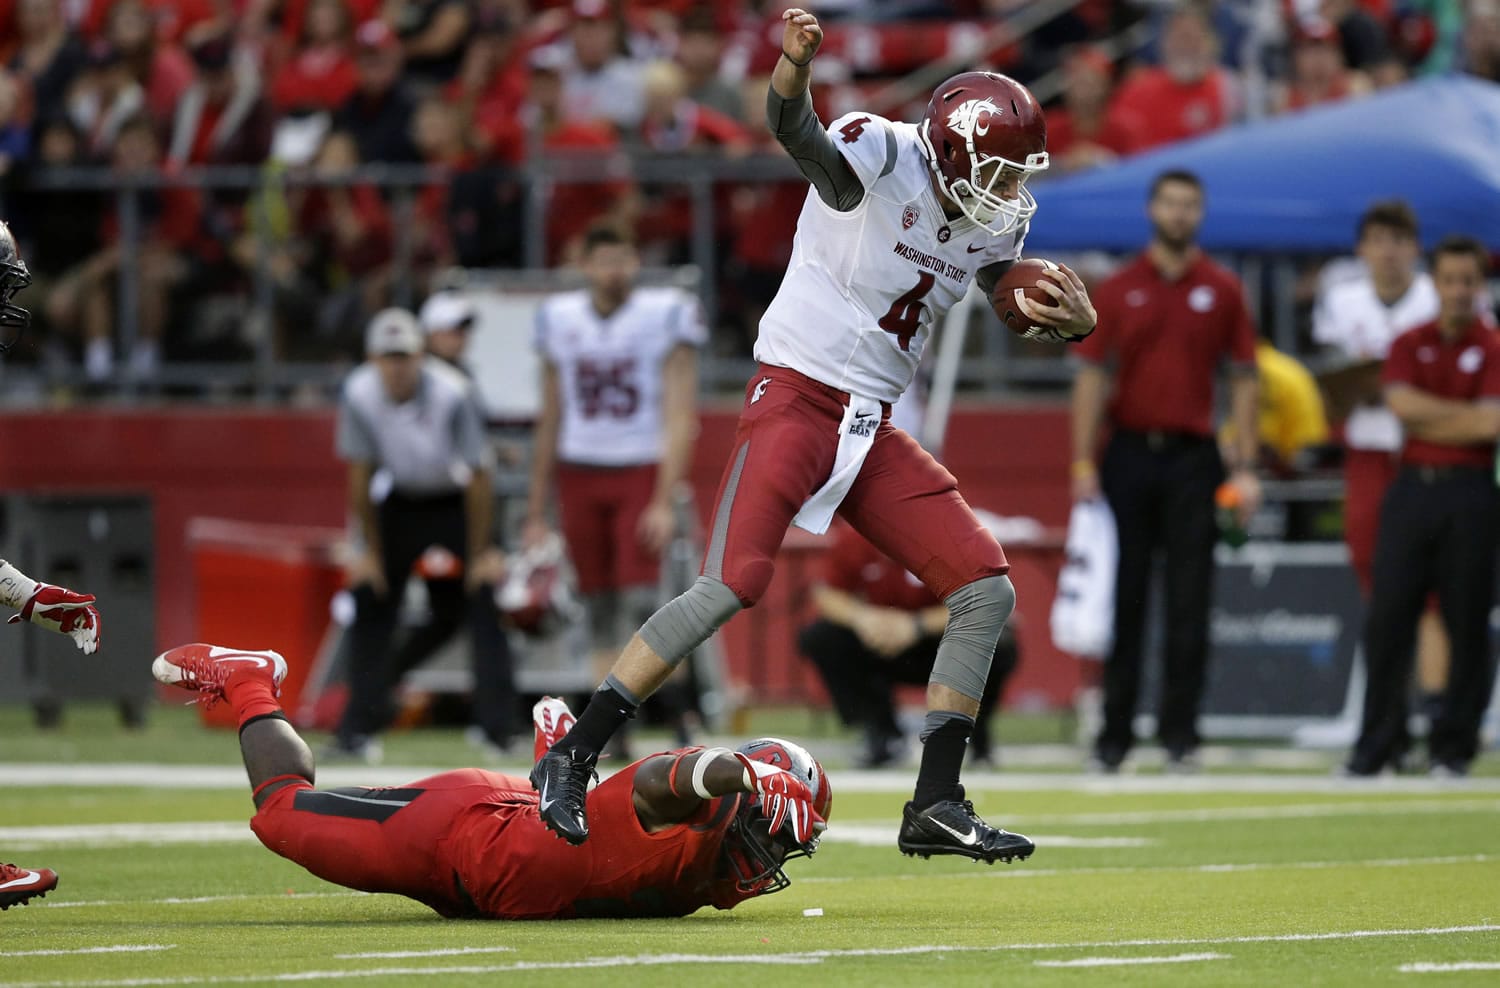 Washington State quarterback Luke Falk (4) evades Rutgers defensive lineman Quanzell Lambert (22) as he runs for yardage late in the second half of an NCAA college football game, Saturday, Sept. 12, 2015, in Piscataway, N.J. Washington State won 37-34.